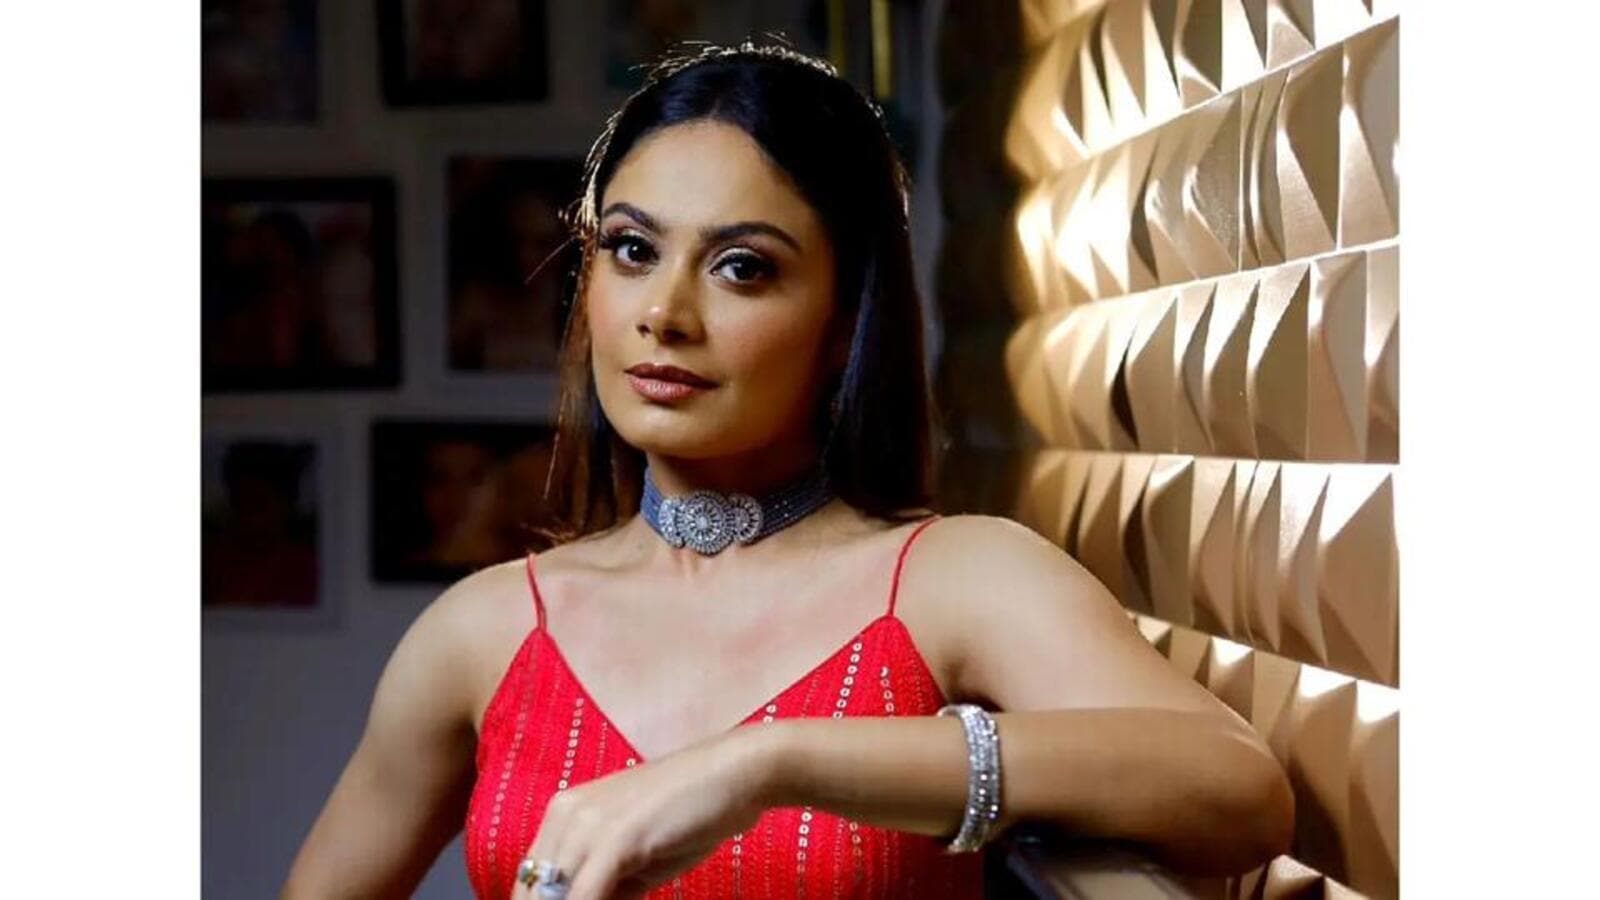 Dharm Yoddha Garud’s Toral Rasputra is ‘open to love’, says ‘Waiting patiently’